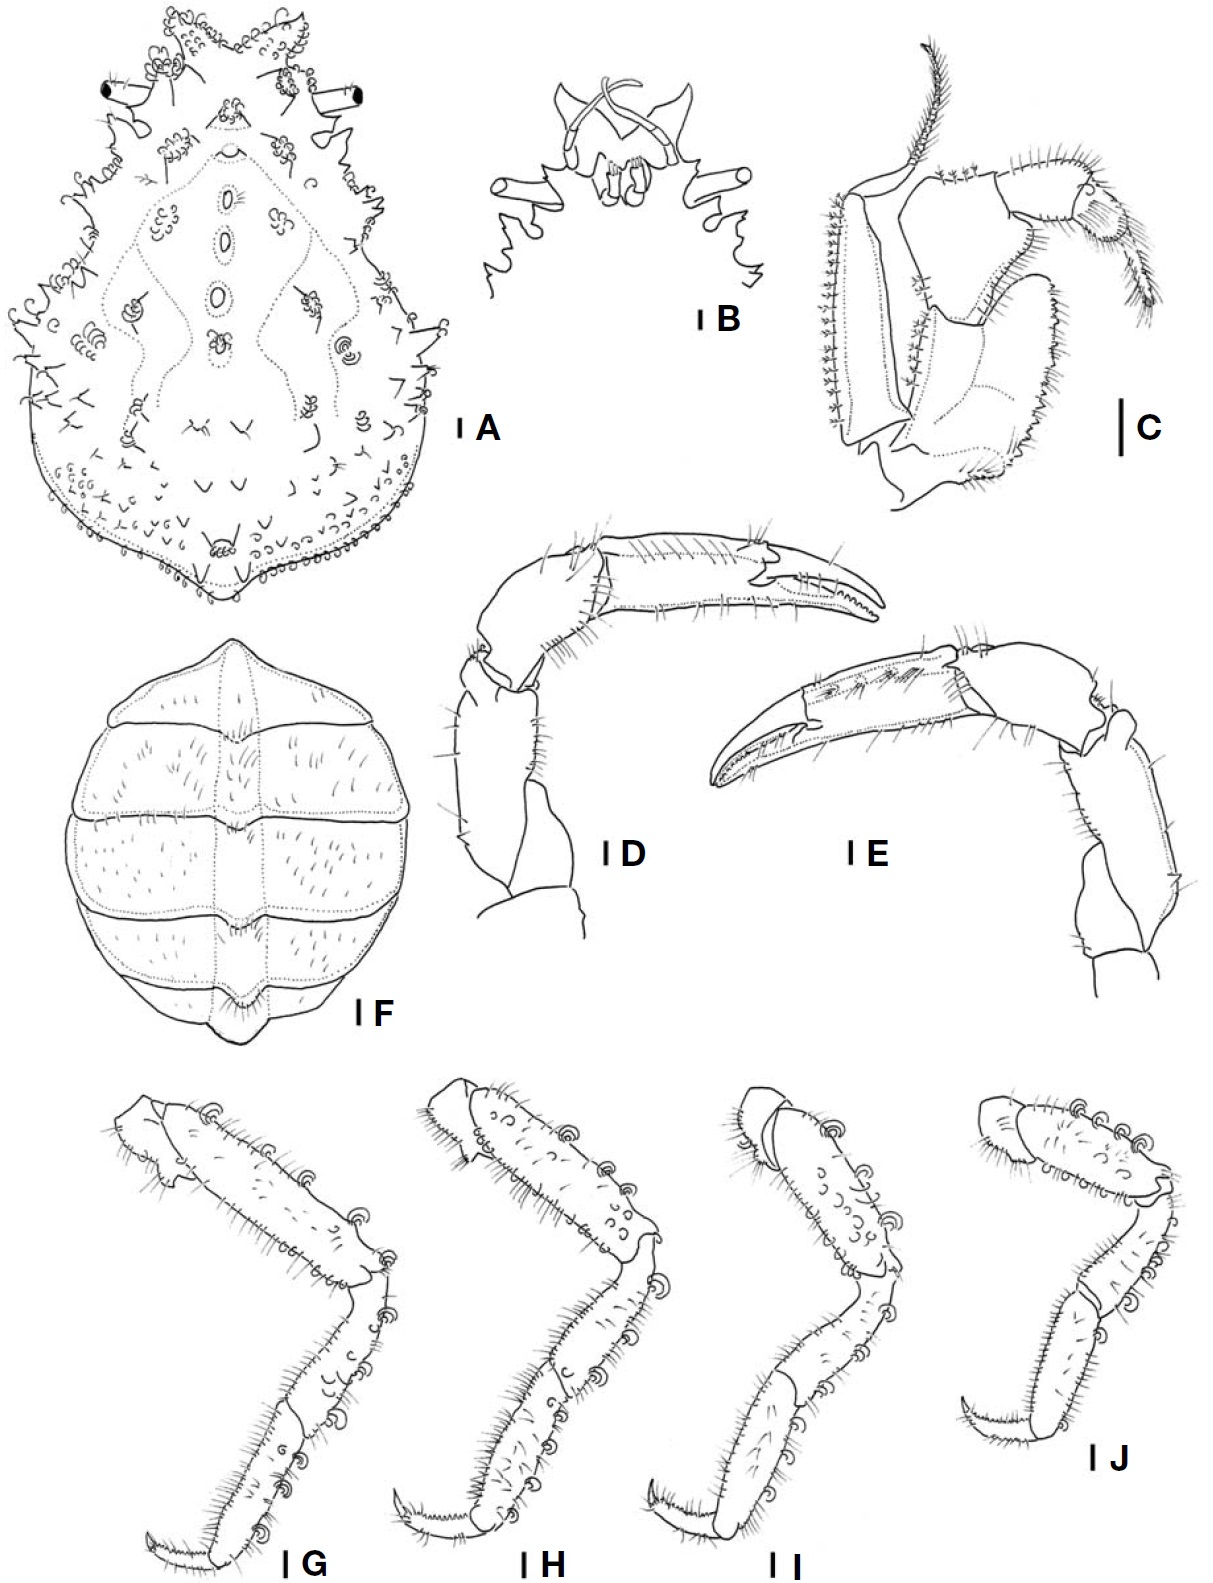 Pseudomicippe nipponica, female (cl 28 mm, cw 21 mm). A, Dorsal view of carapace; B, Ventral view of carapace; C, Ventral view of left third maxilliped; D, E, Dorsal views of chelipeds; F, Female abdomen; G-J, First to fourth ambulatory legs. cl, carapace length from the tip of the frontal margin to the posterior dorsal margin of the carapace; cw, the width of the carapace measured at the widest part. Scale bars: A-J=1 mm.